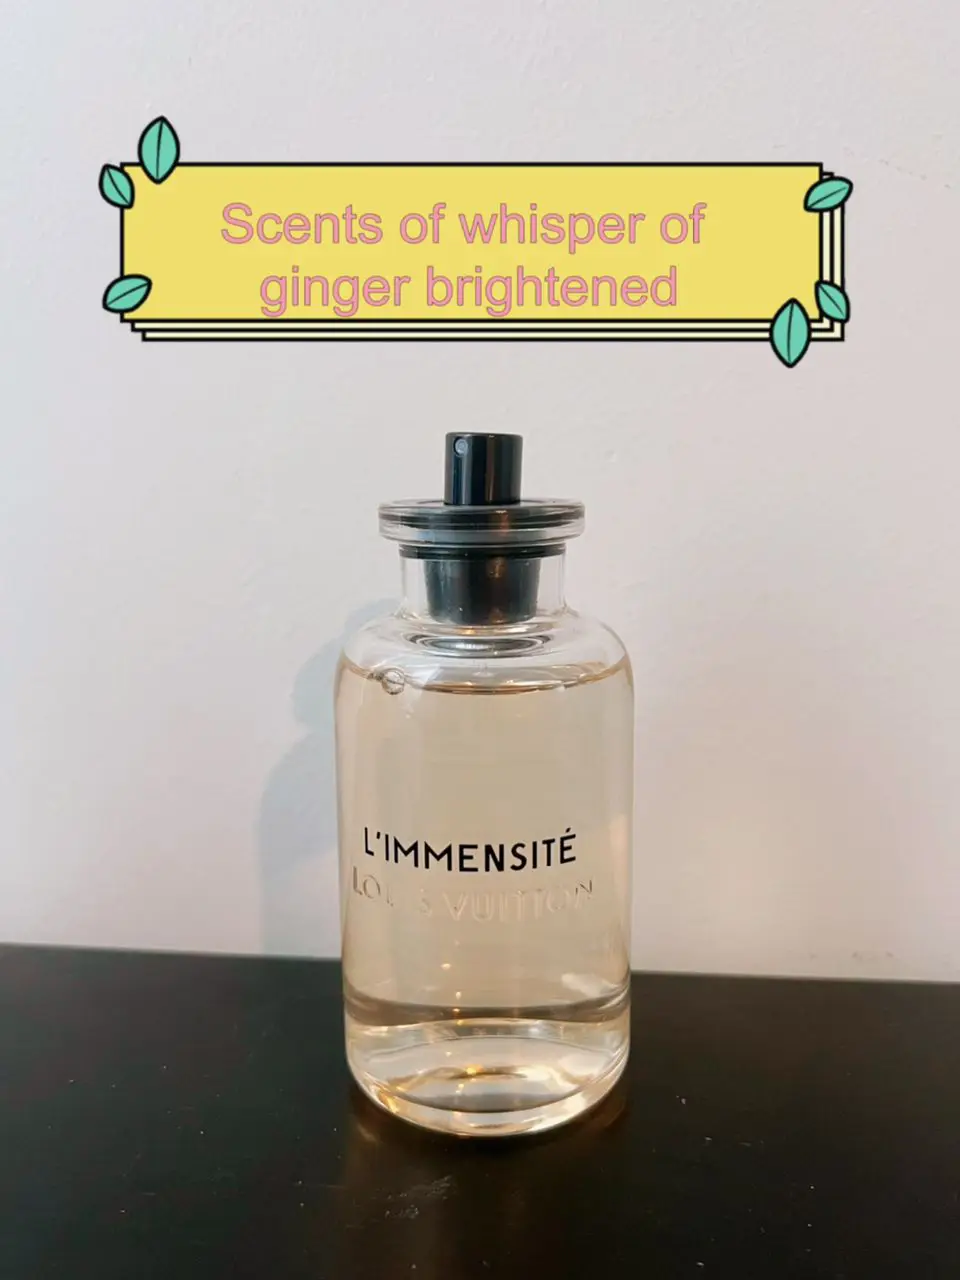 LOUIS VUITTON L'IMMENSITE REVIEW  ALL YOU NEED TO KNOW ABOUT THIS  FRAGRANCE 